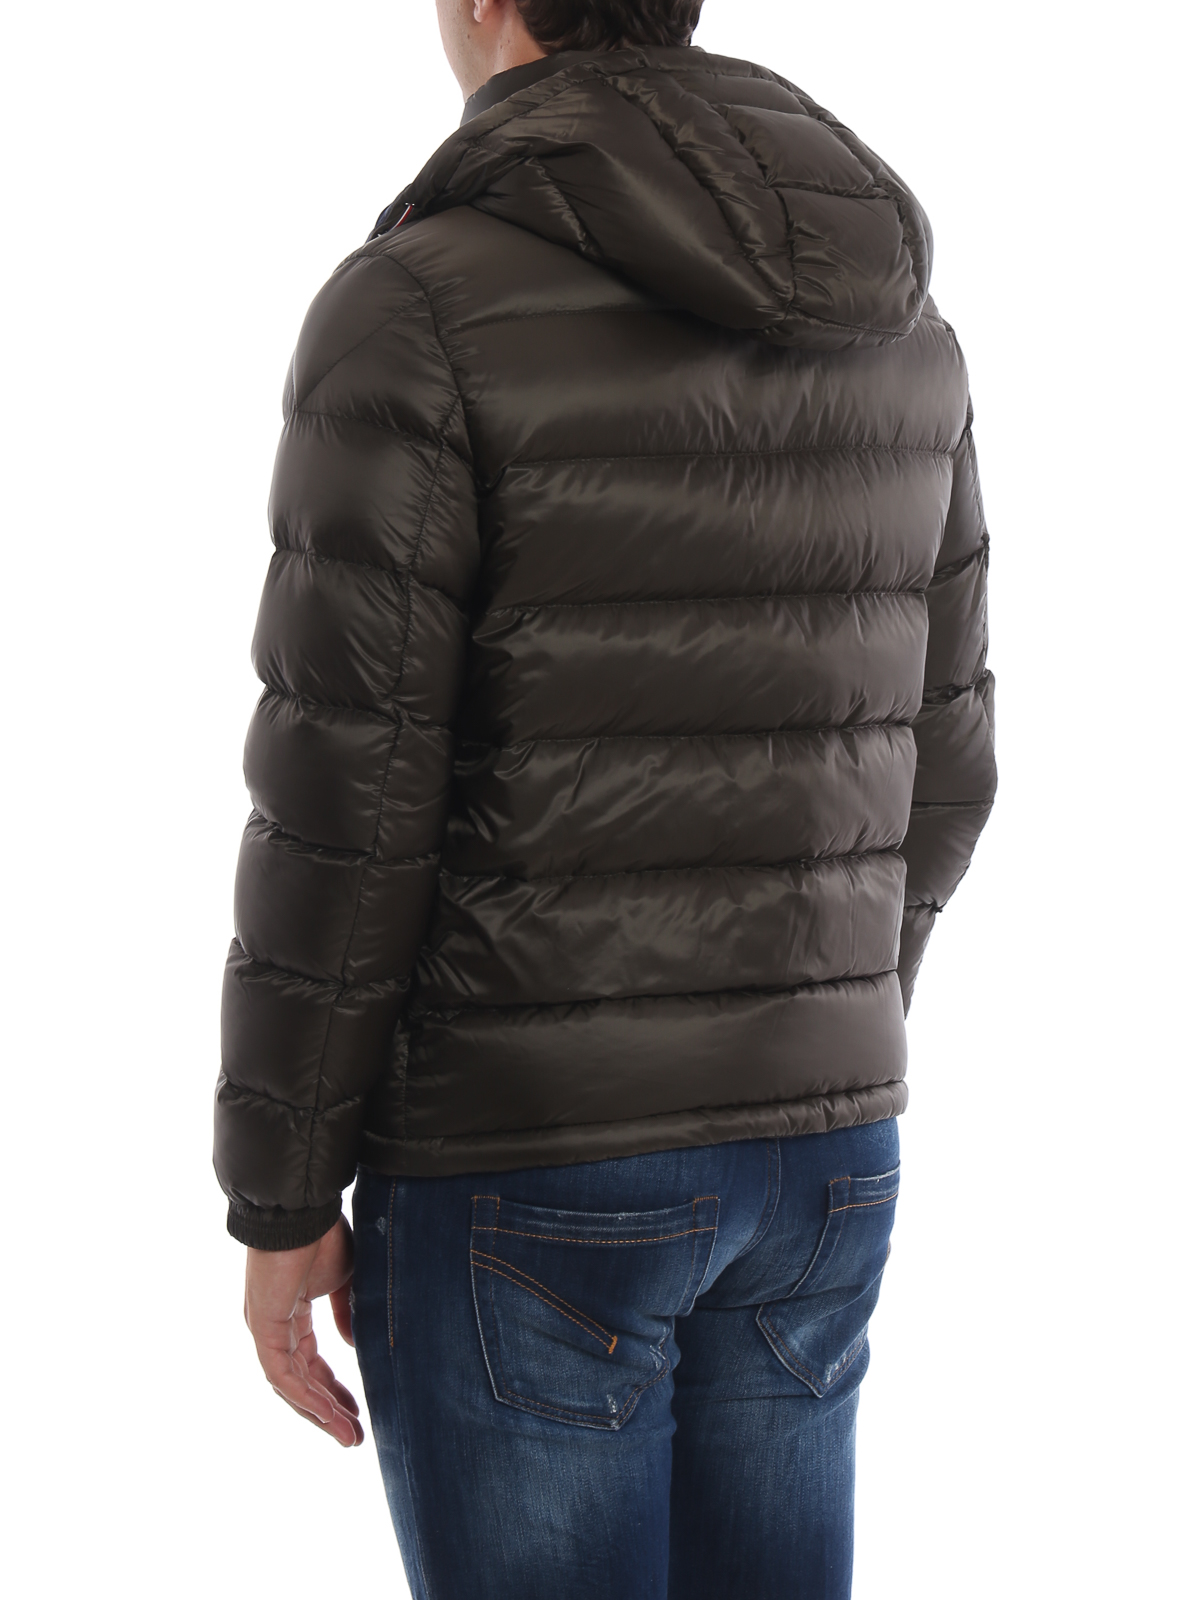 Moncler - Bramant moss green hooded puffer jacket - padded jackets ...